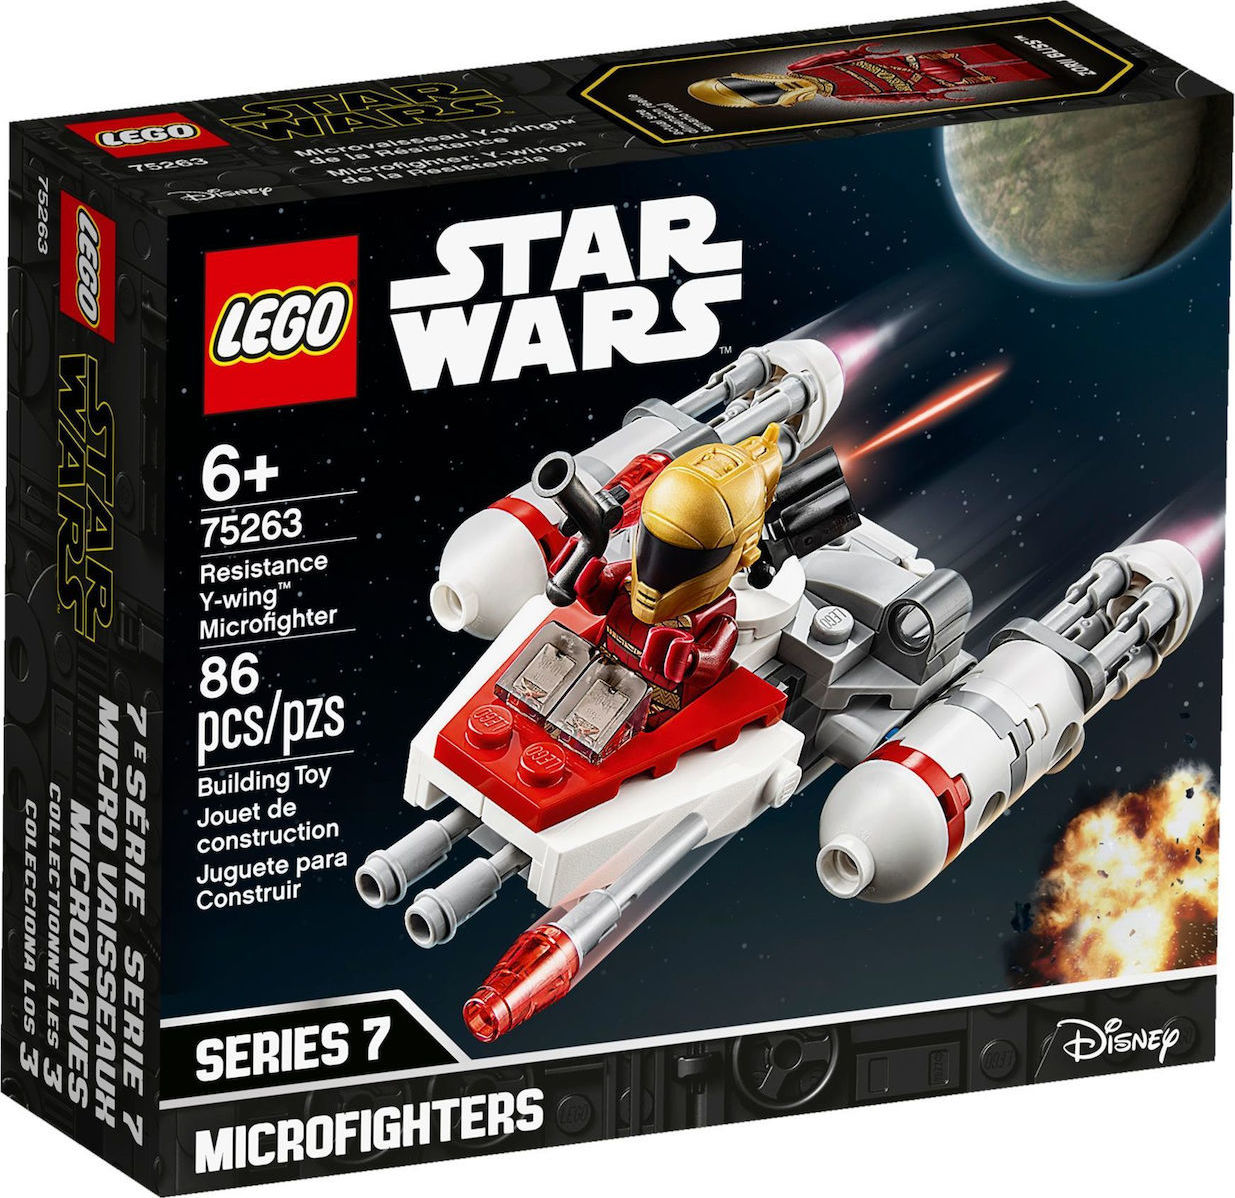 Lego Star-Wars Resistance Y-wing Microfighter 75263